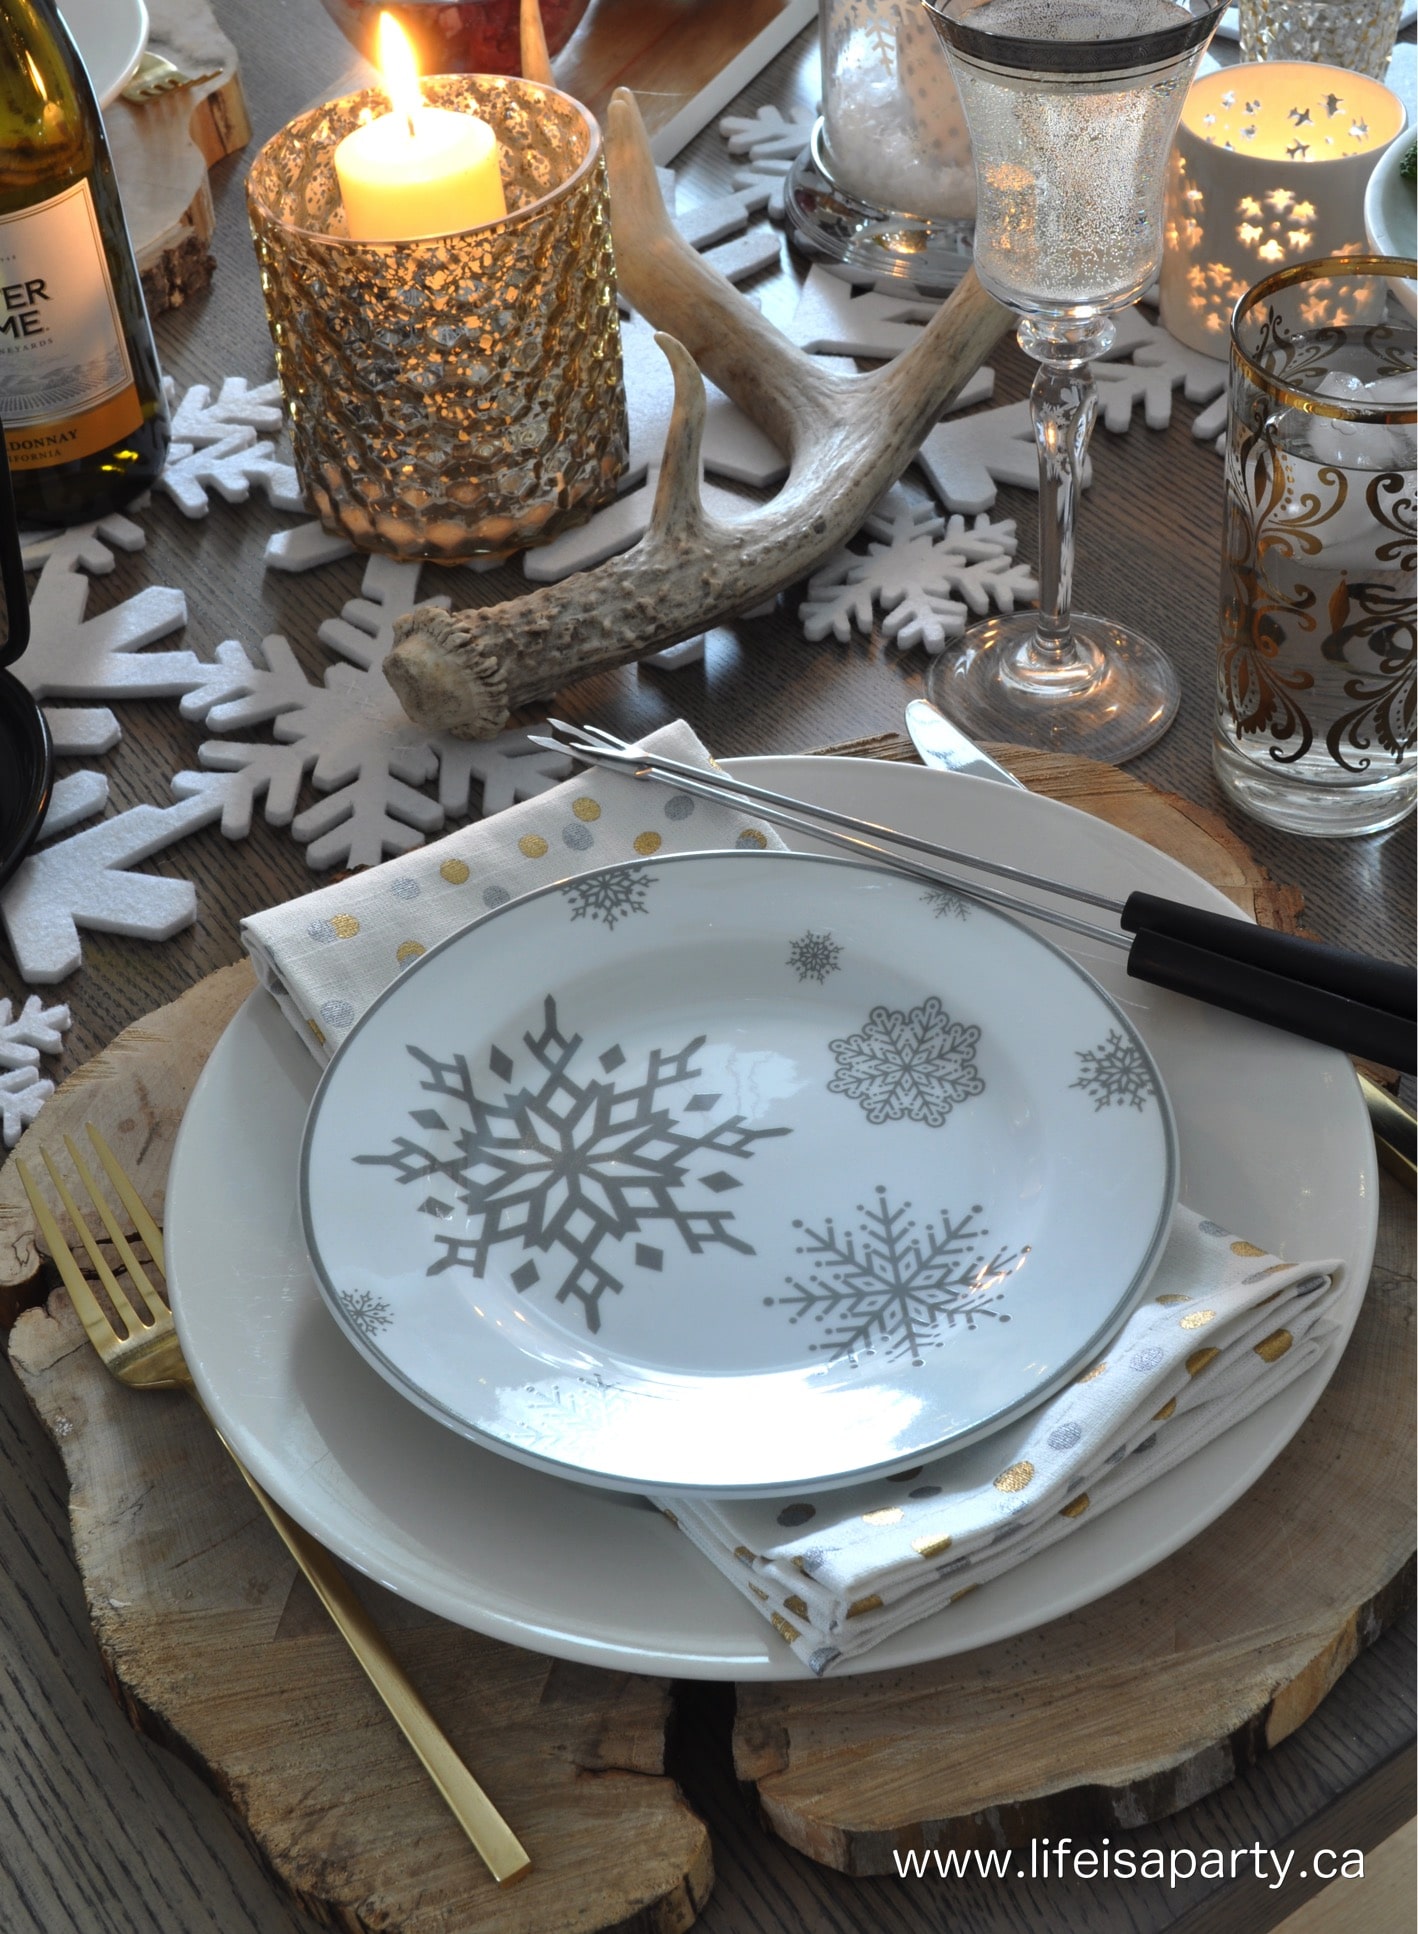 Christmas pacesetting with wood charger, gold cutlery, and snowflake plate.